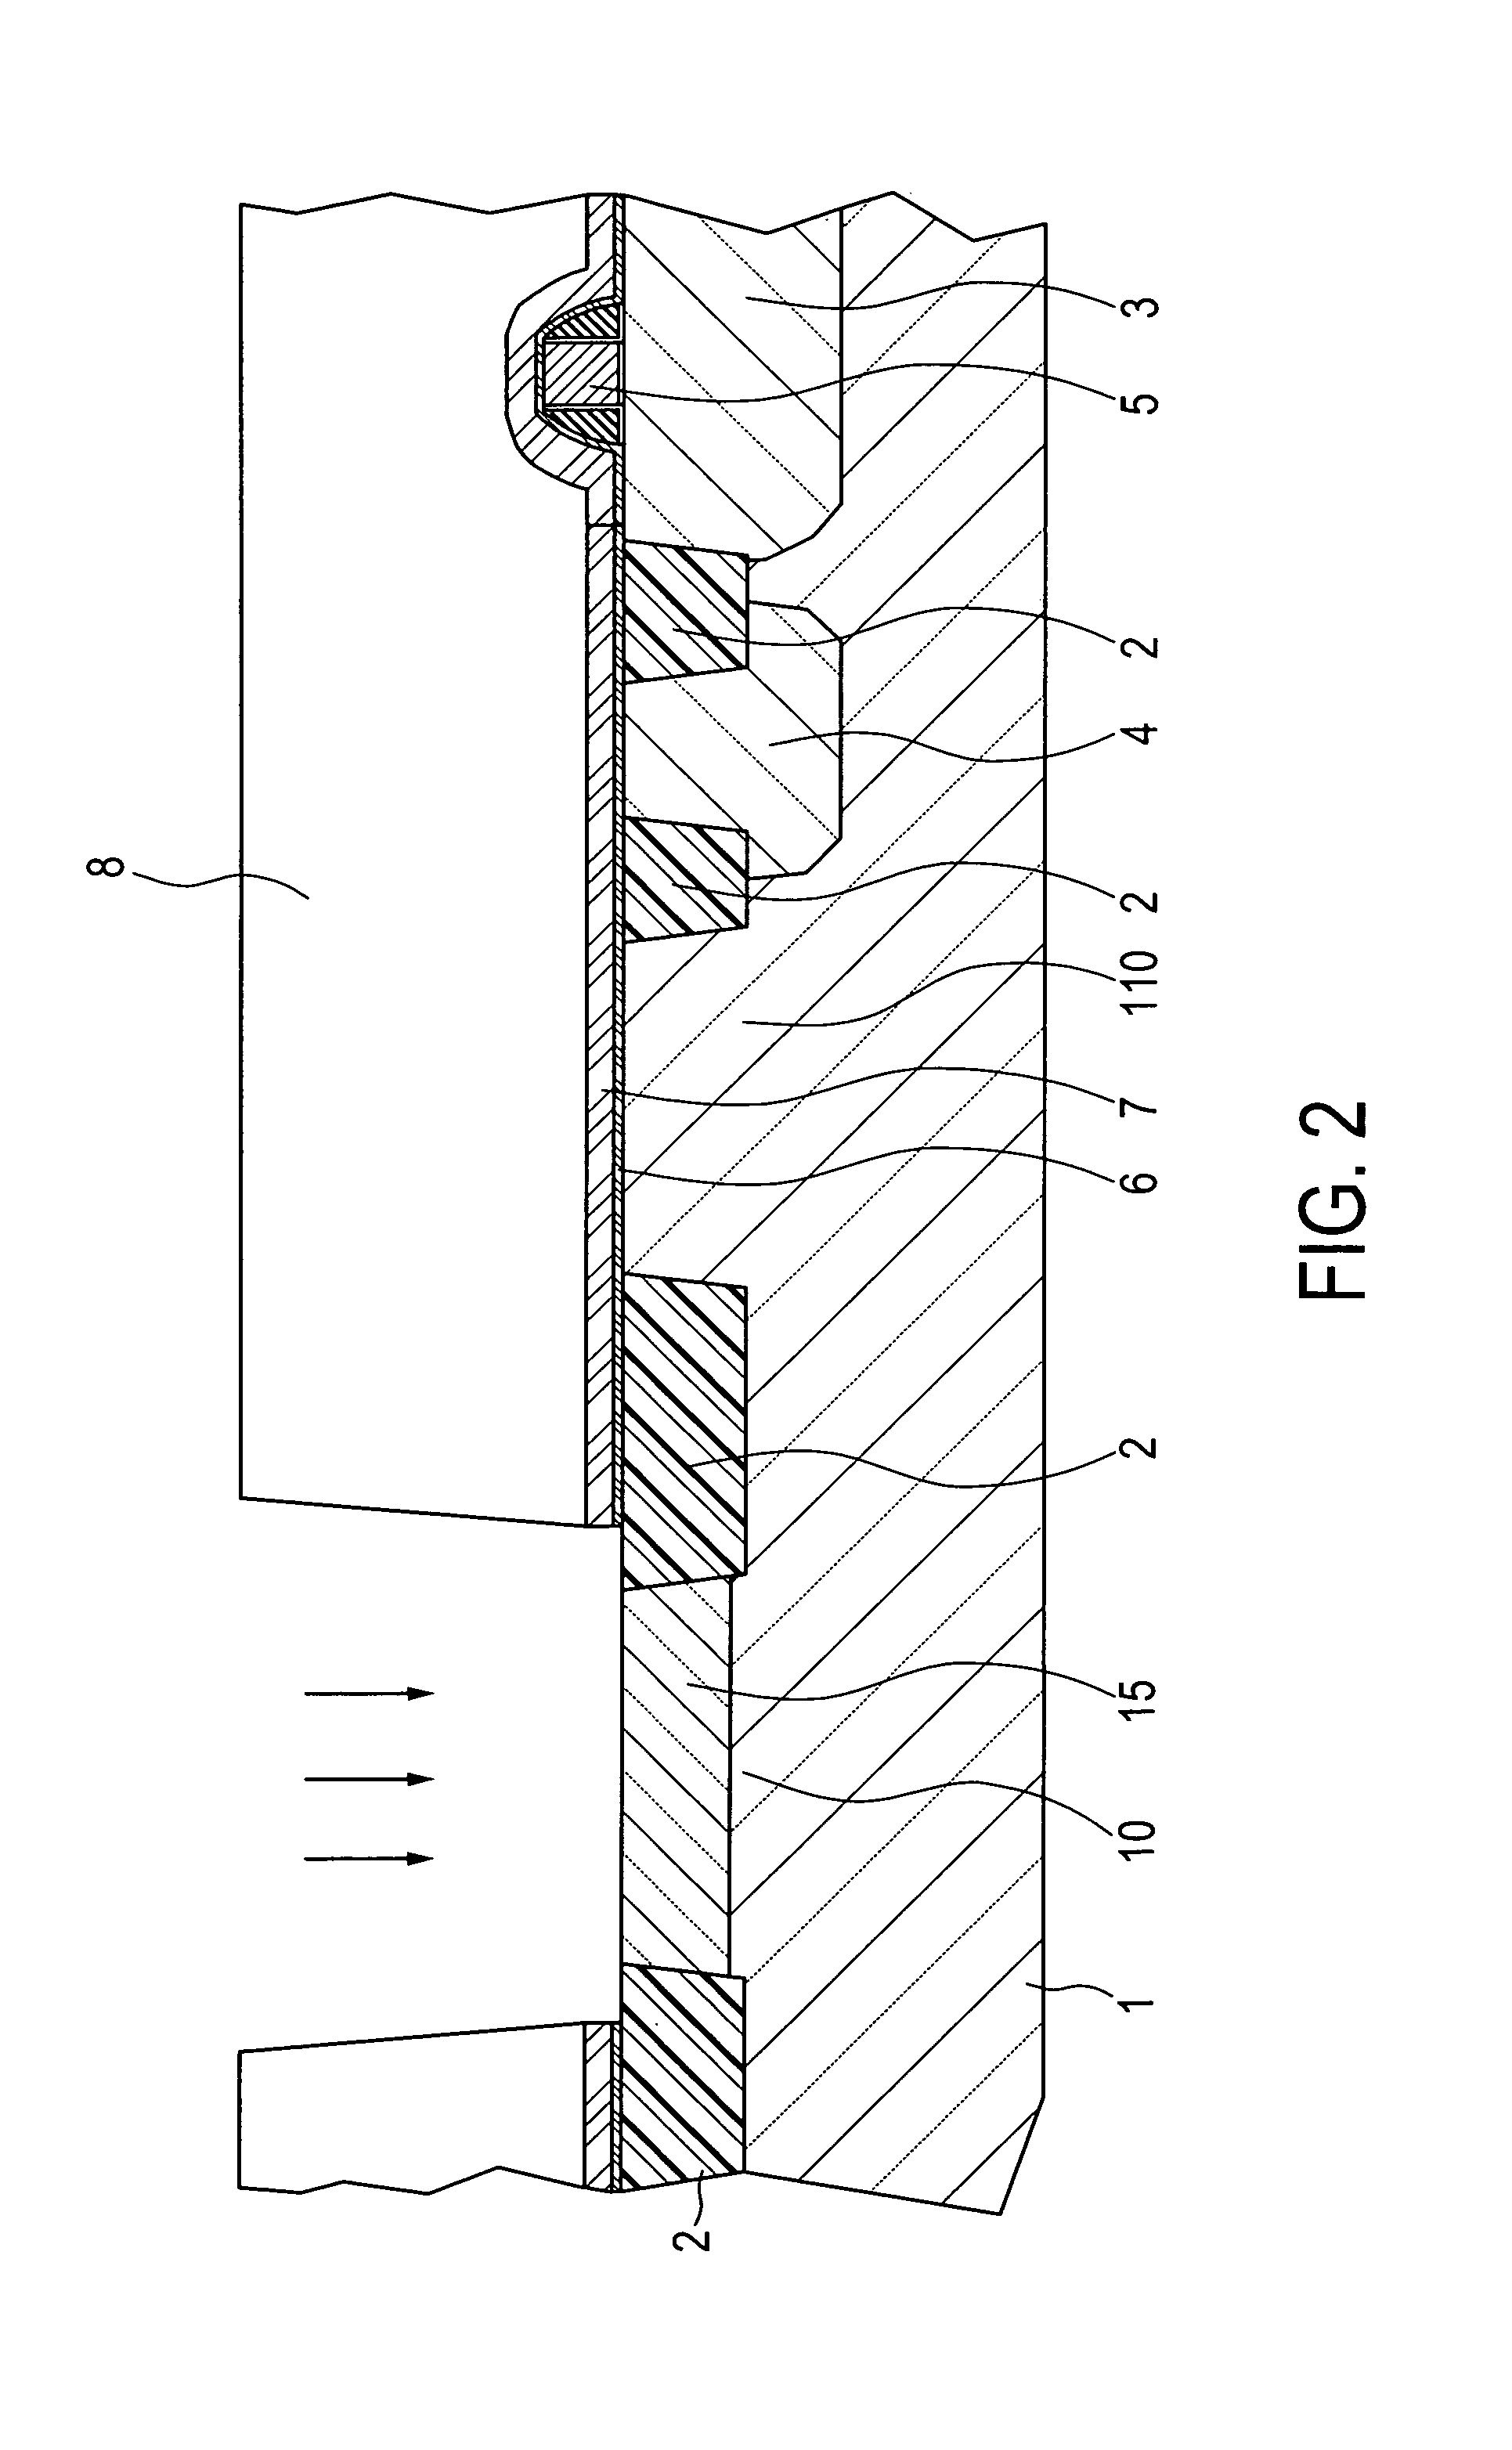 Bipolar complementary semiconductor device